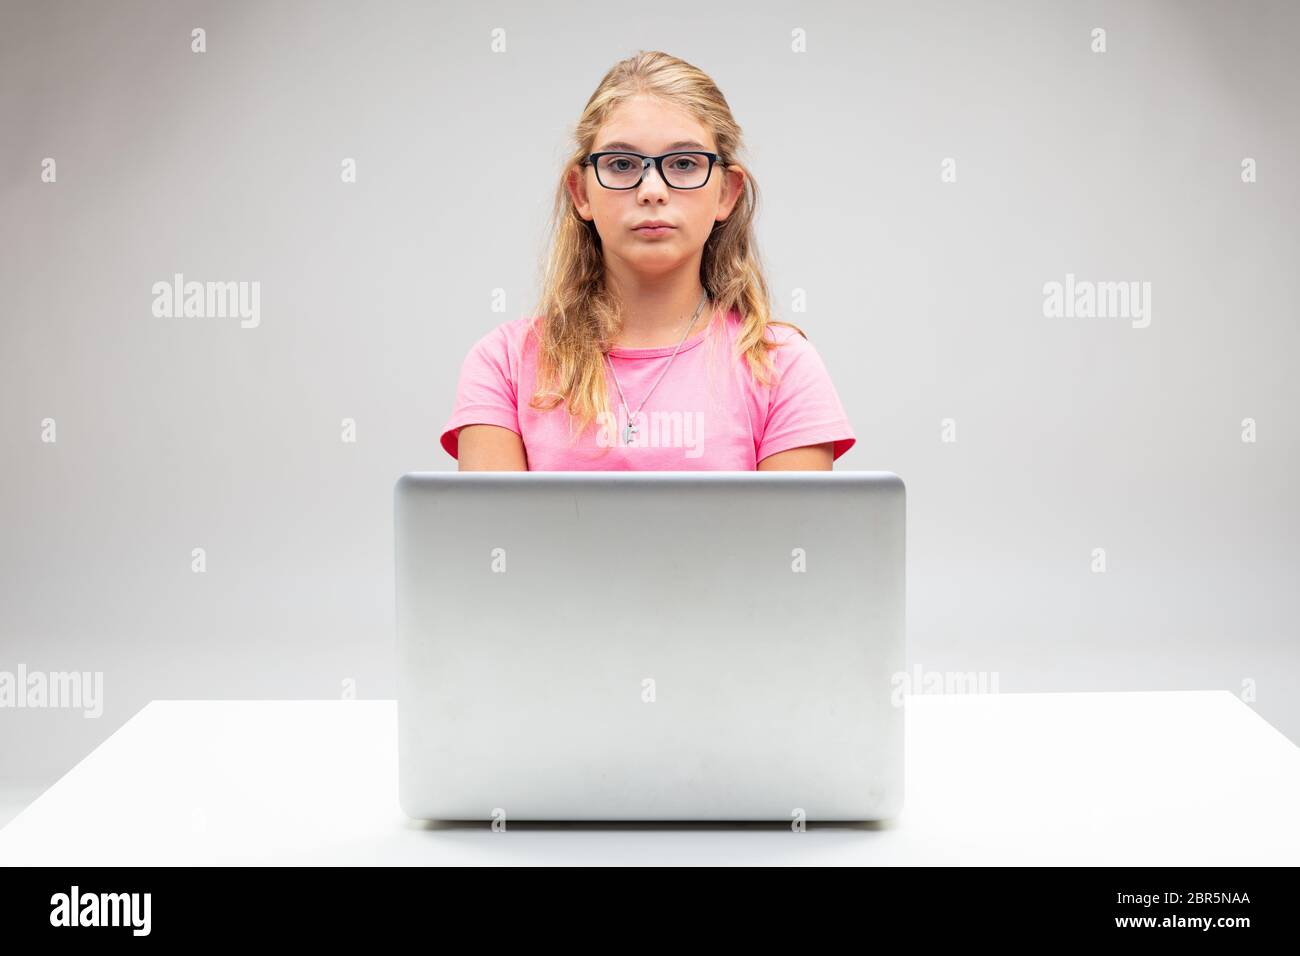 Proud little blond girl seated at her laptop with a deadpan stern expression wearing glasses in a spoof of a scholarly student or businesswoman Stock Photo